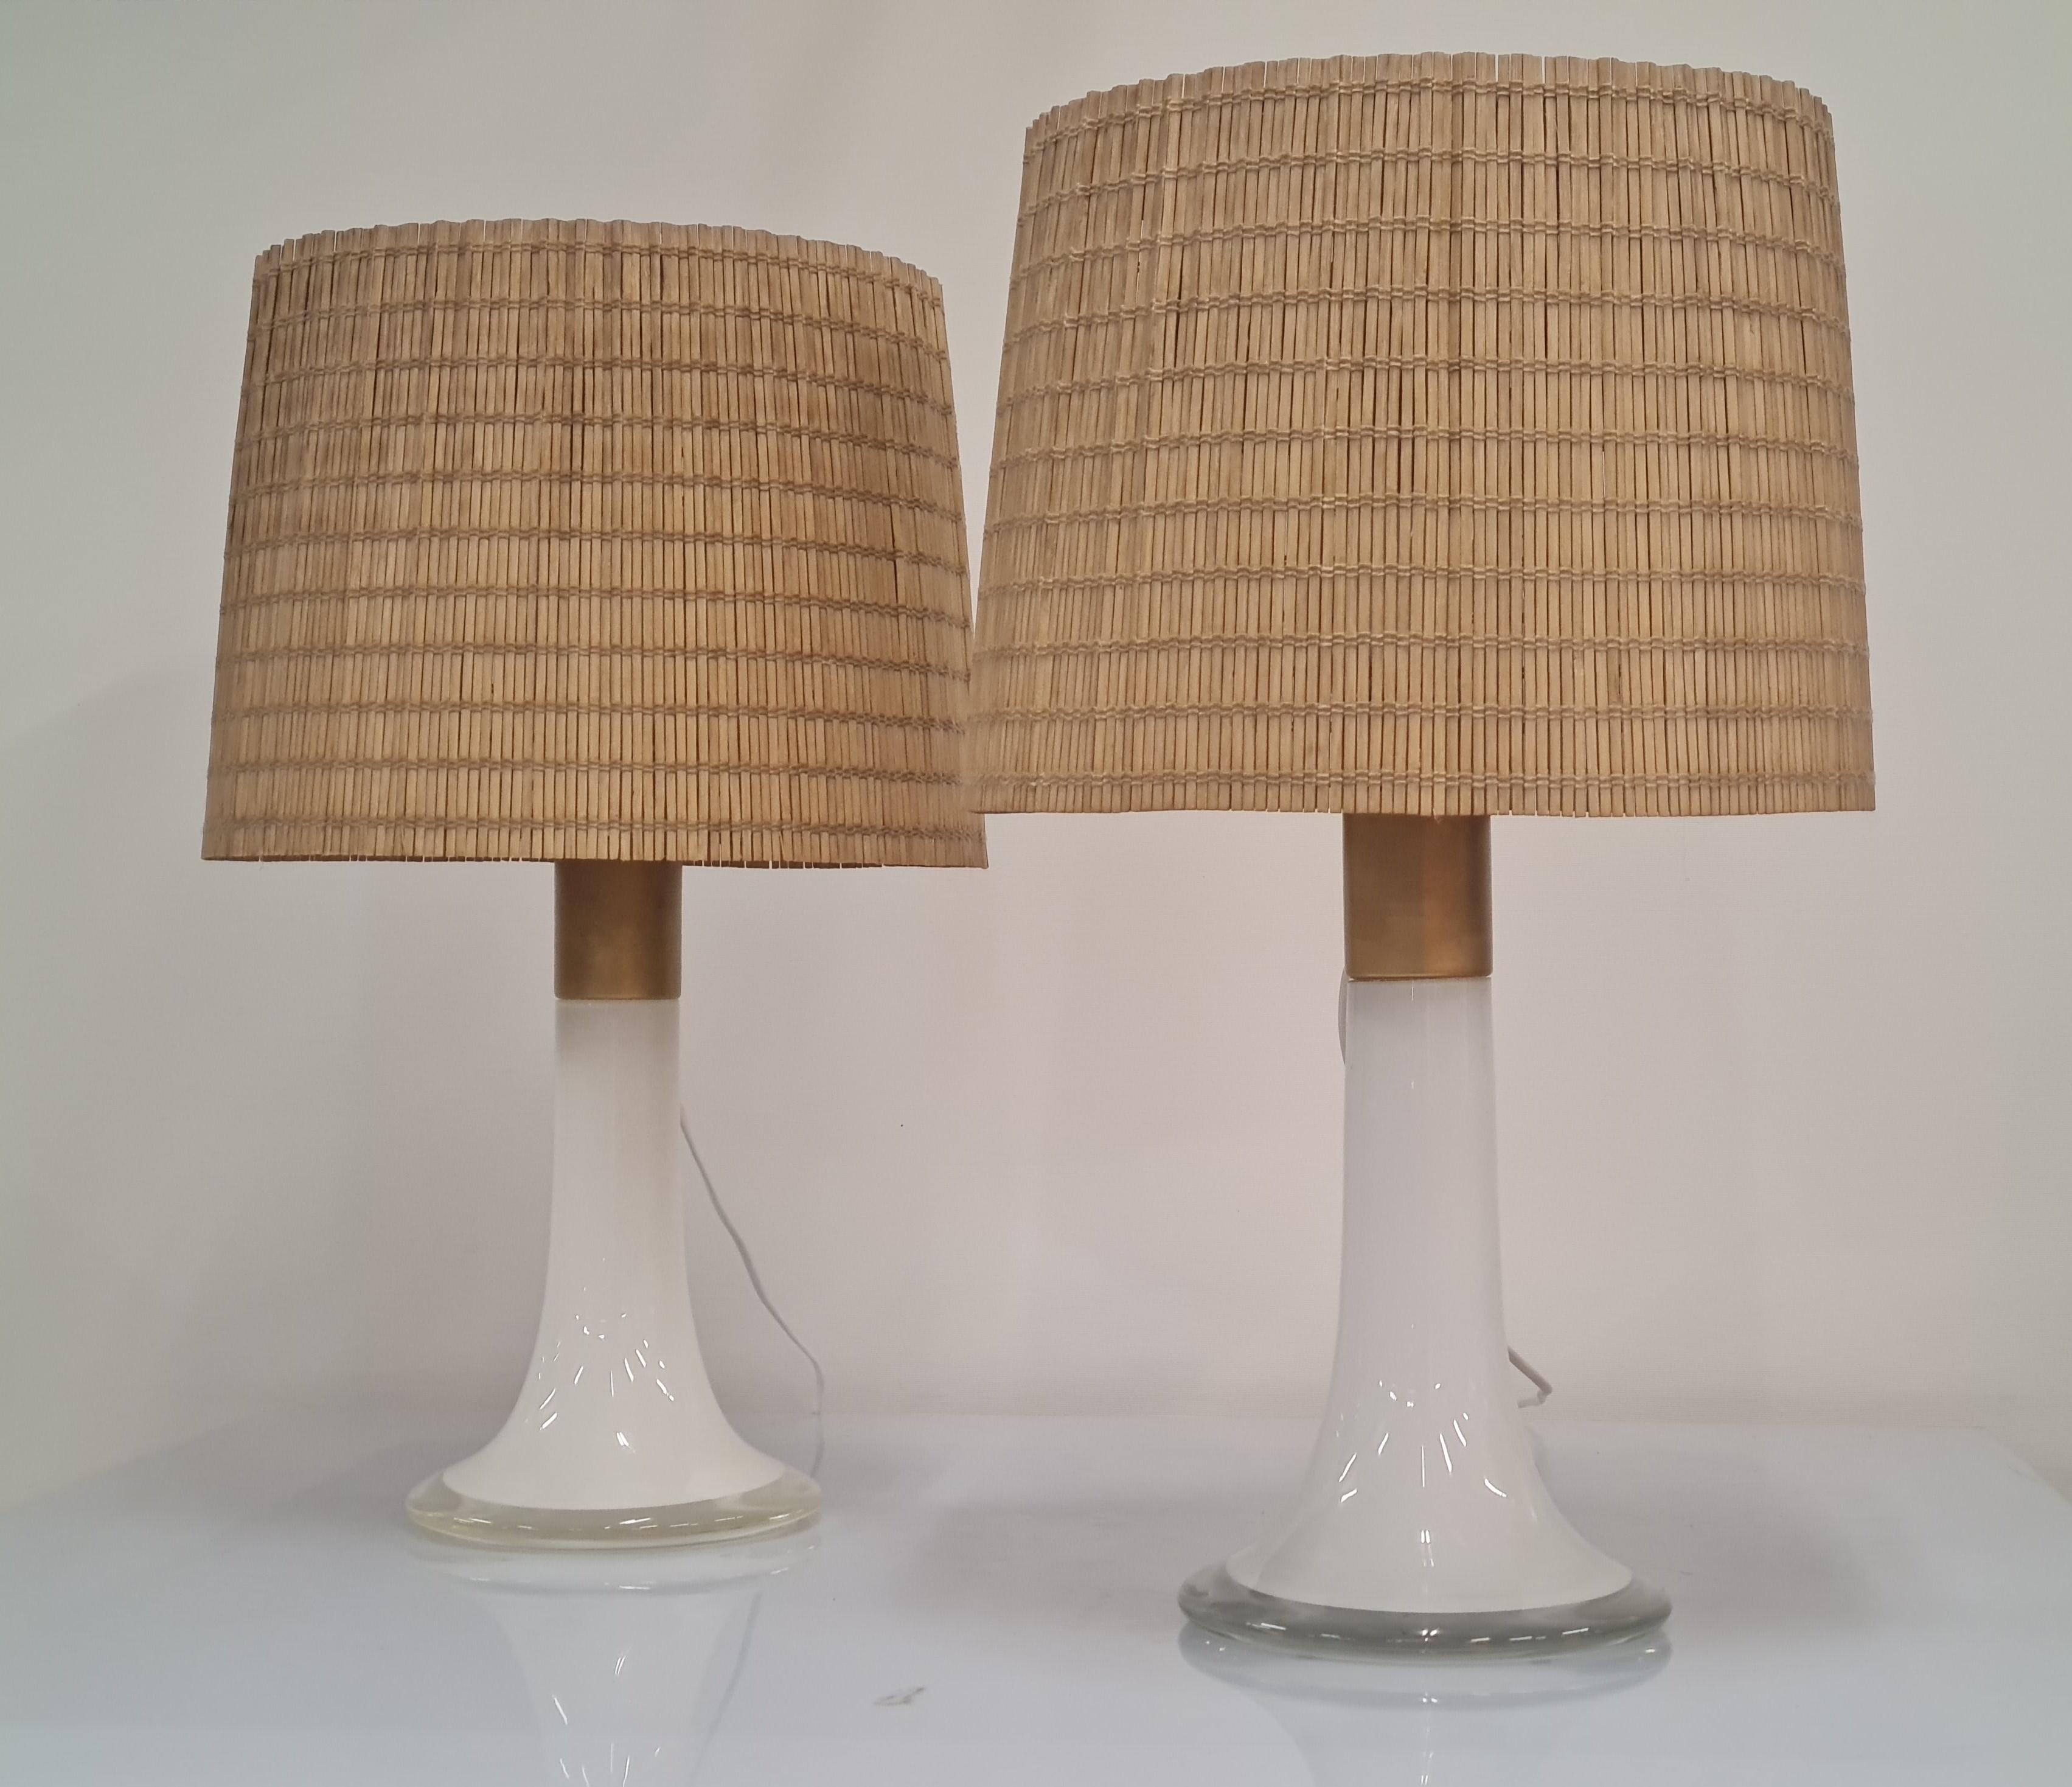 Lisa Johansson Pape Pair of Table Lamps Model 46-017, Orno 1960s For Sale 5